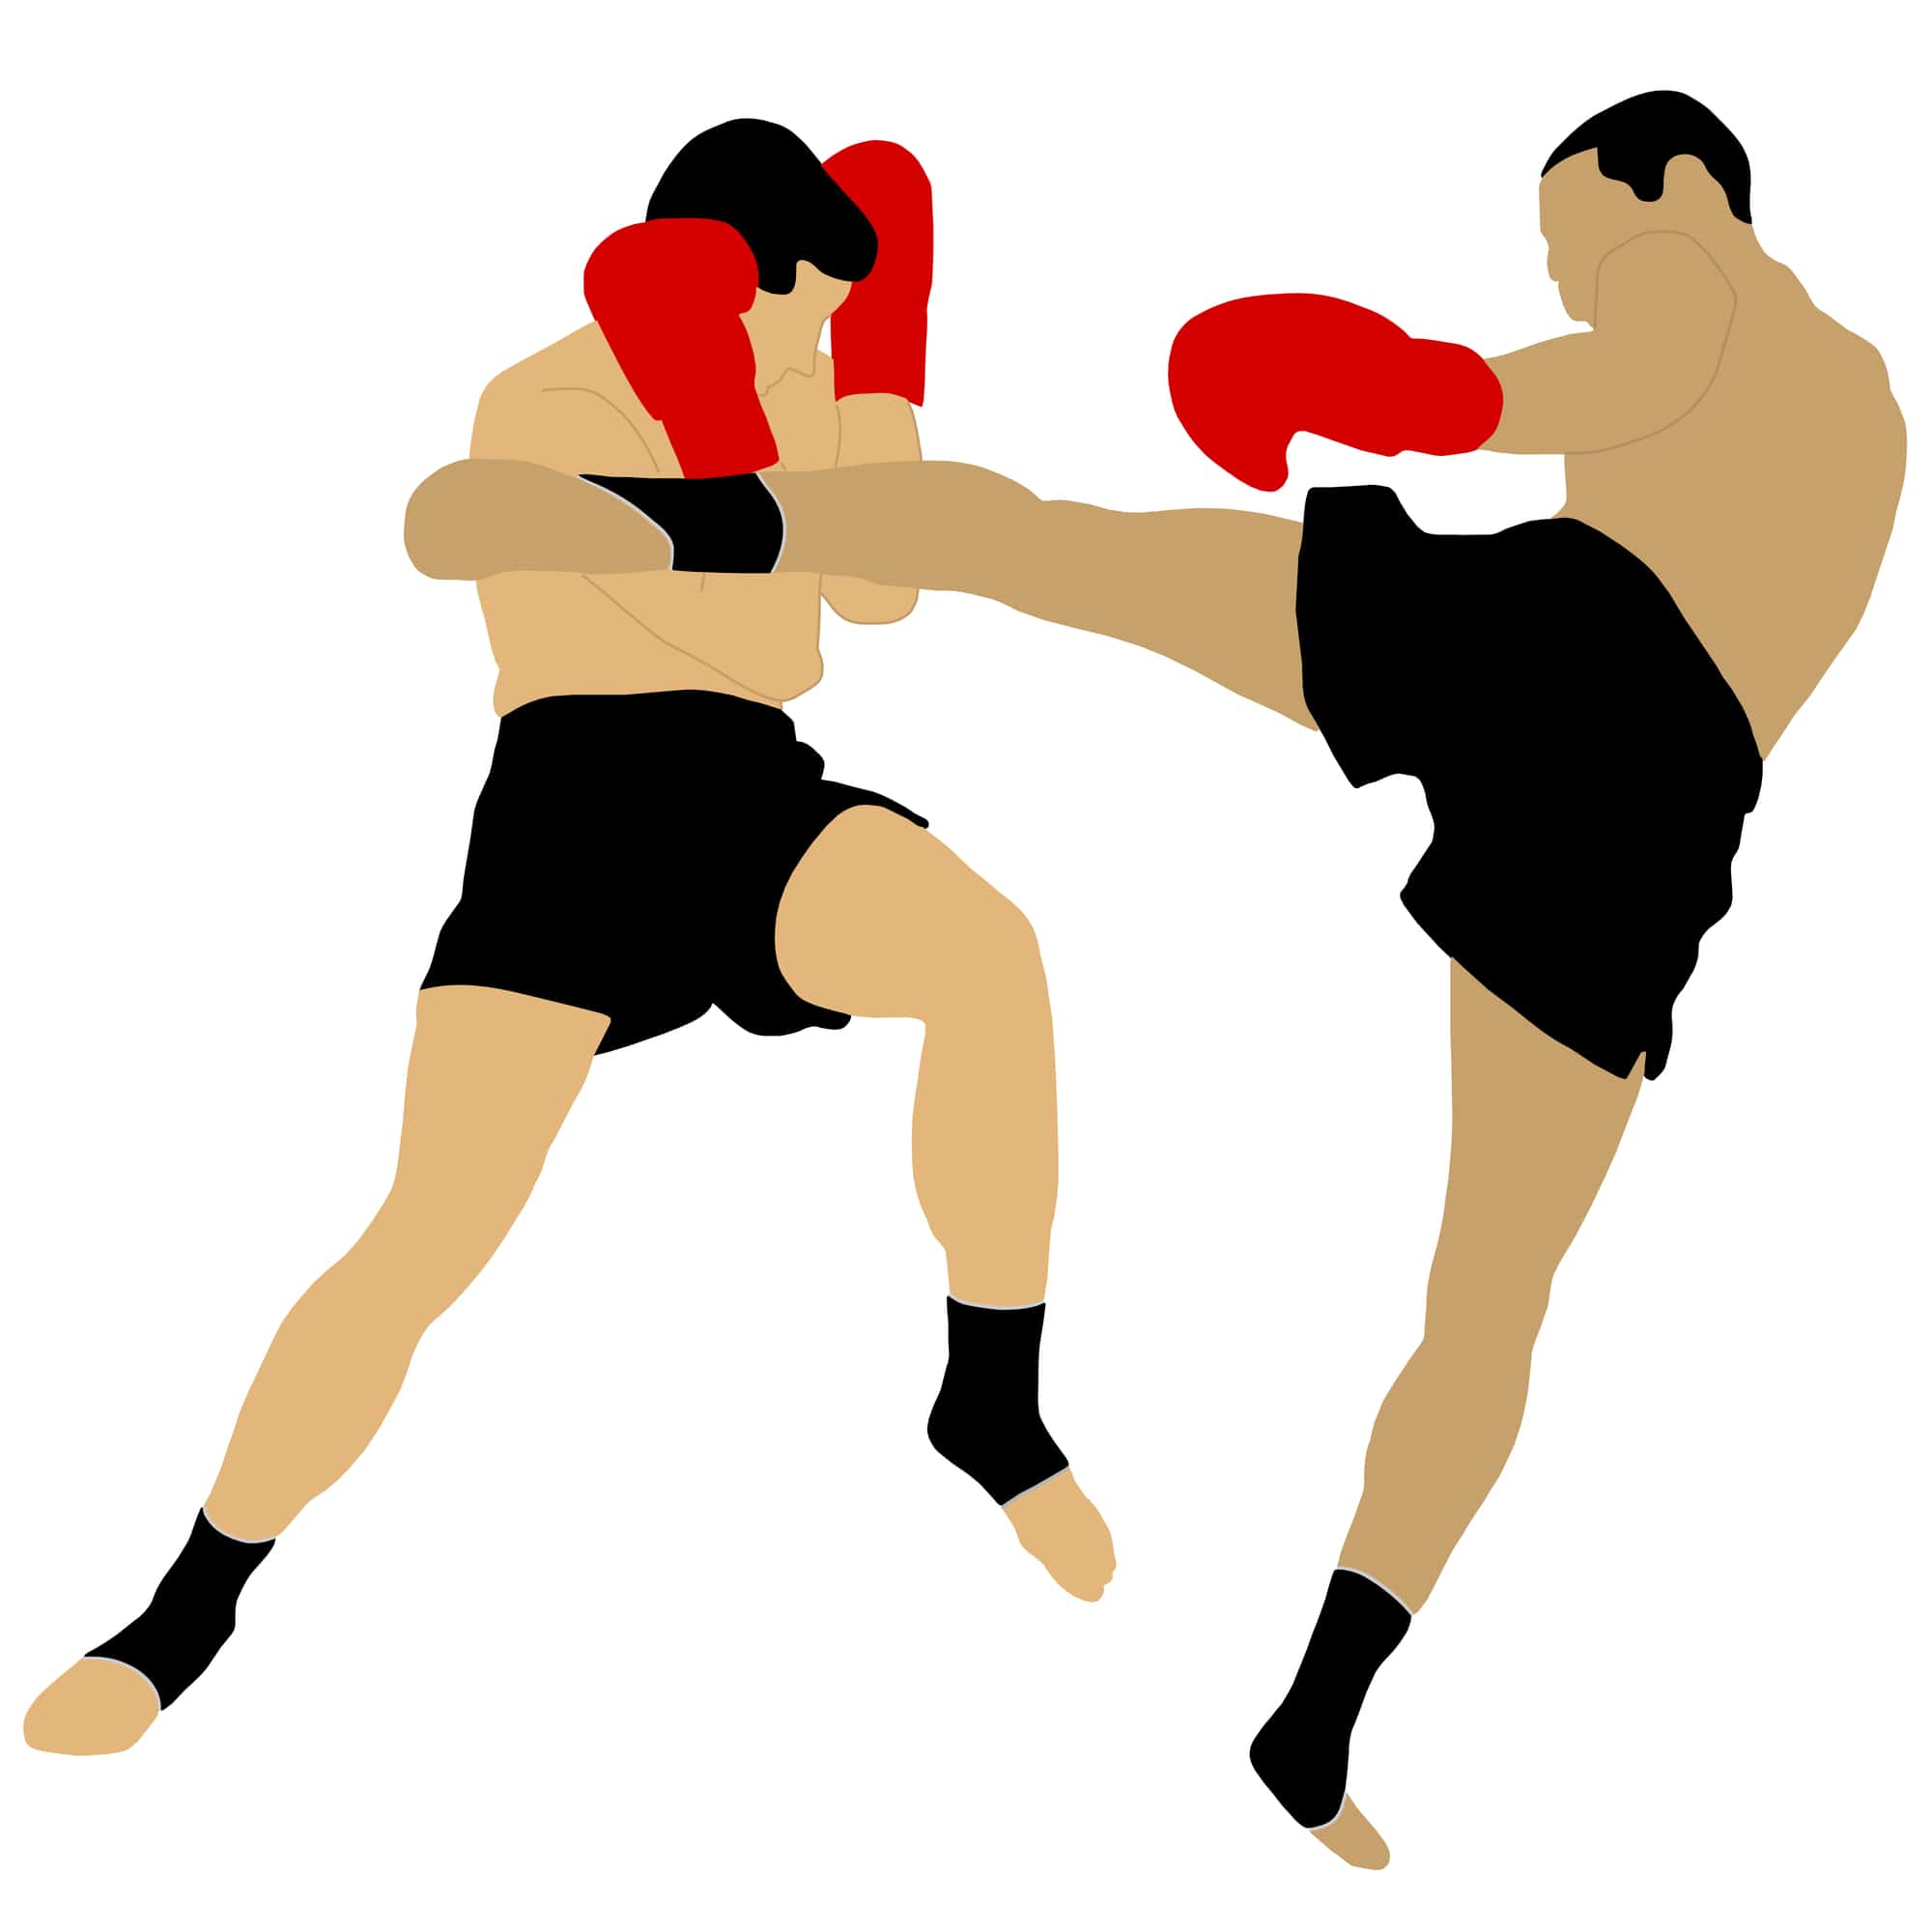 What is the difference between Muay Thai and Kickboxing?